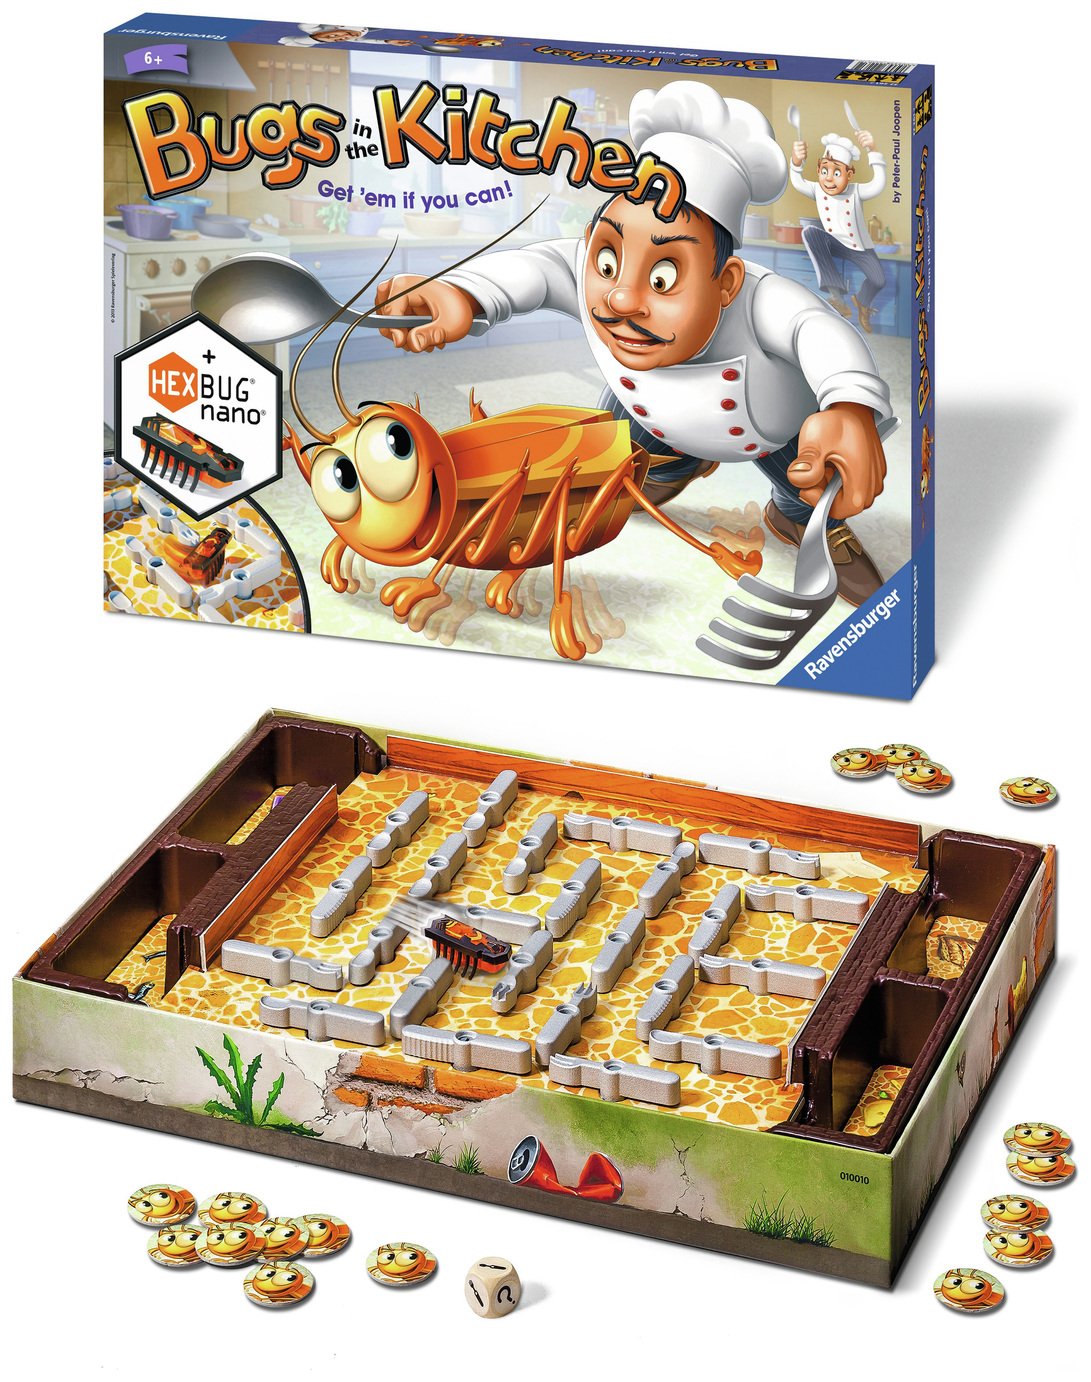 Ravensburger Bugs in the Kitchen Game review